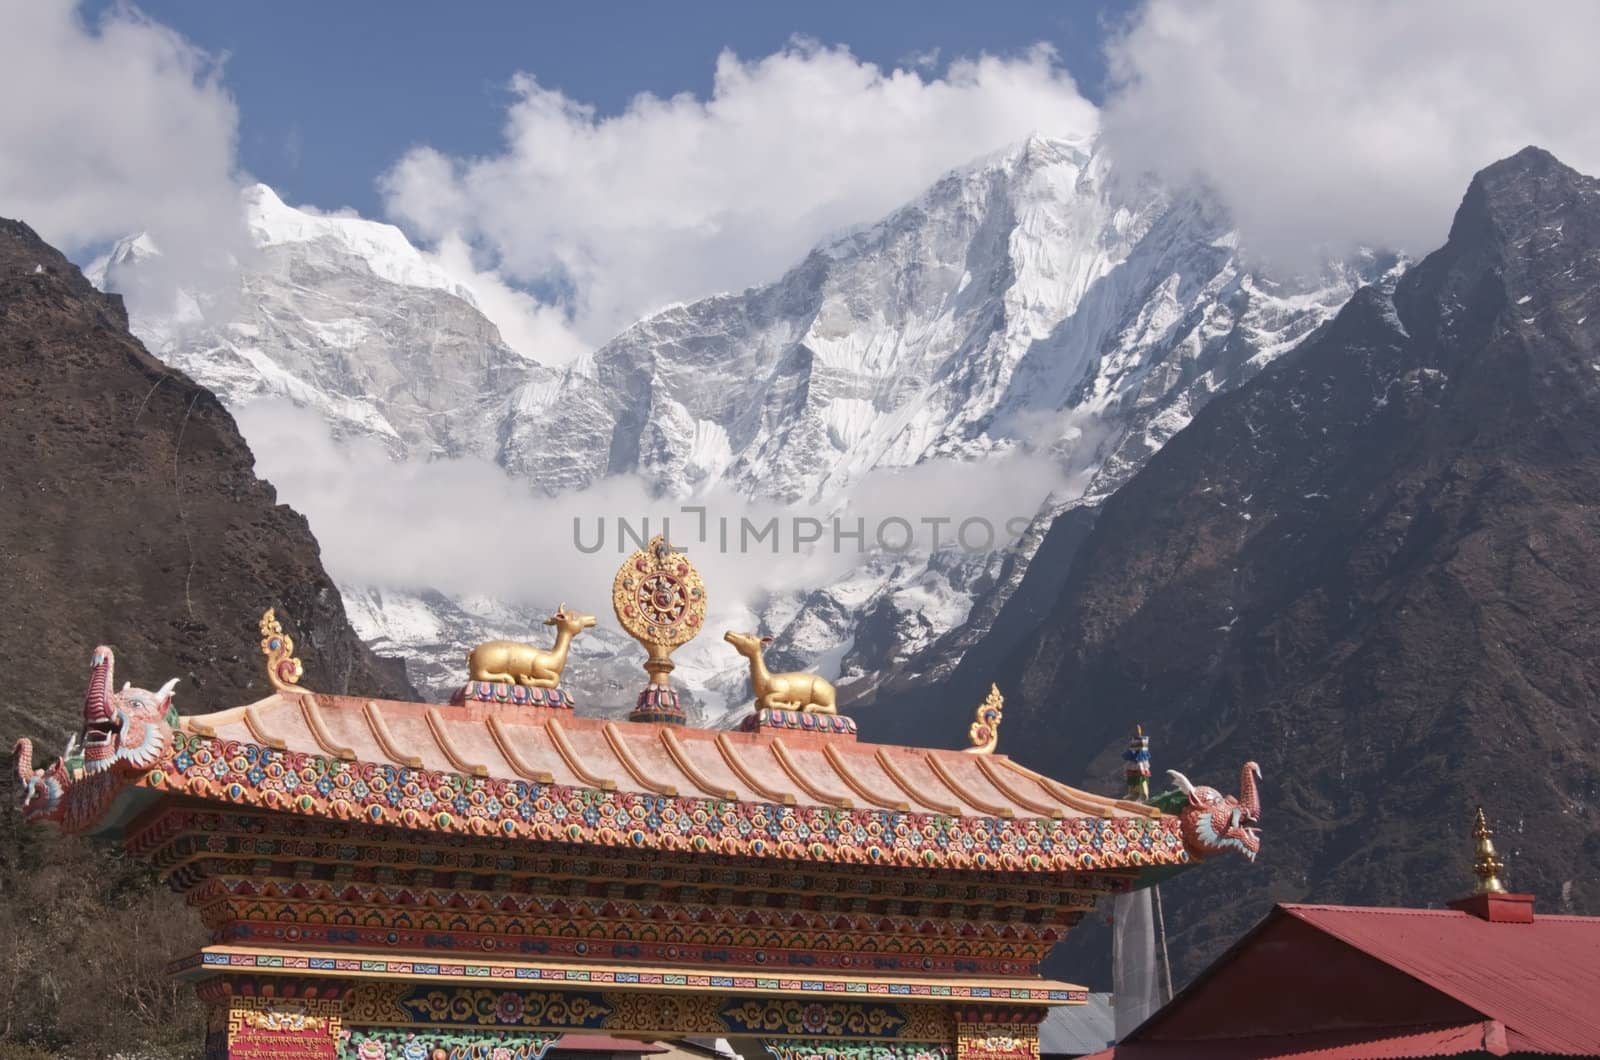 Entrance to Buddhist Monastery at Tengboche (3860 Metres) on the trekking route to Everest Base Camp. Himalaya Mountains, Nepal